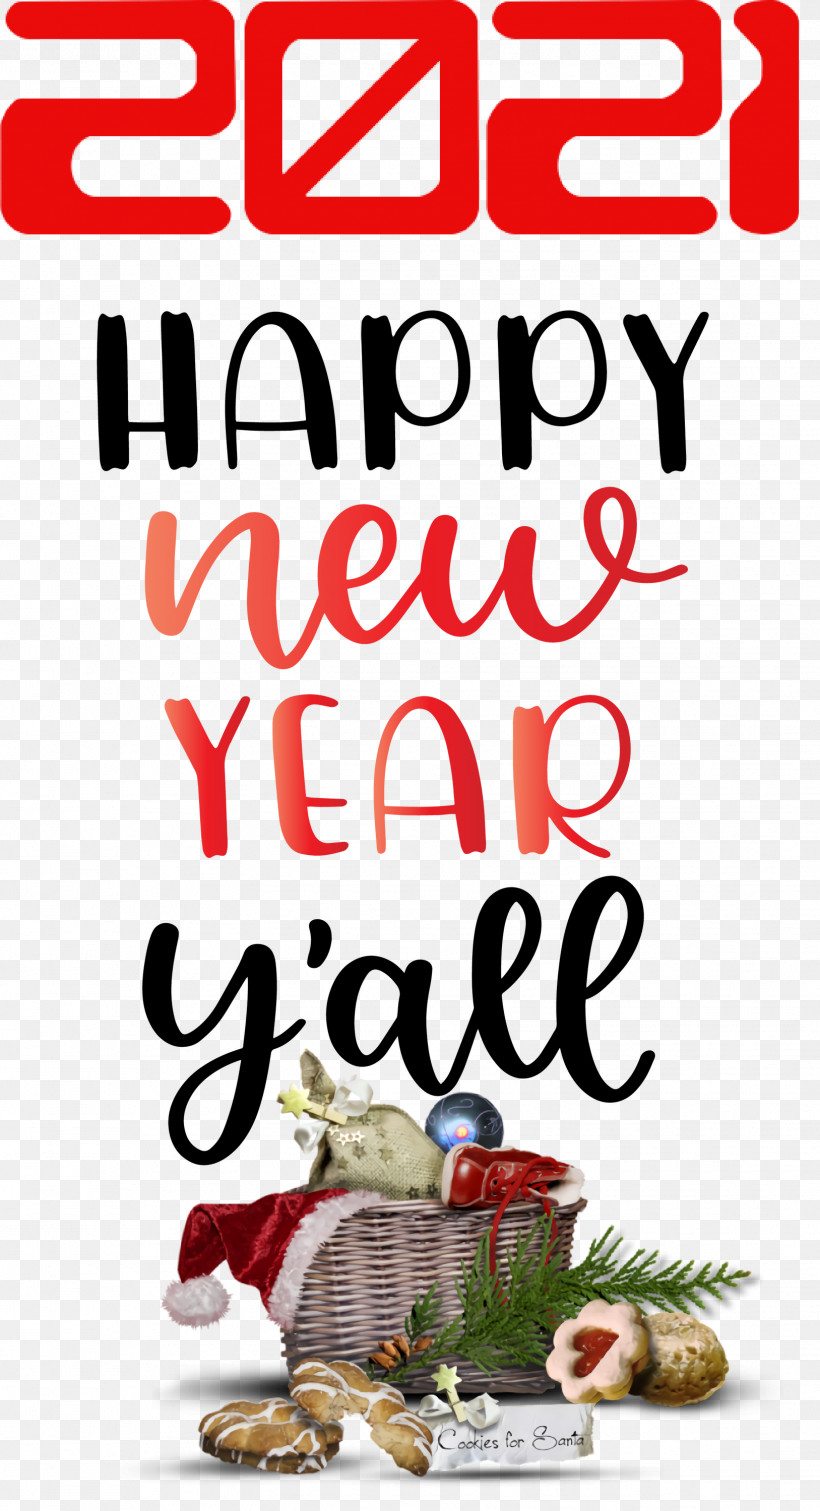 2021 Happy New Year 2021 New Year 2021 Wishes, PNG, 1627x2999px, 2021 Happy New Year, 2021 New Year, 2021 Wishes, Meter, Mitsui Cuisine M Download Free